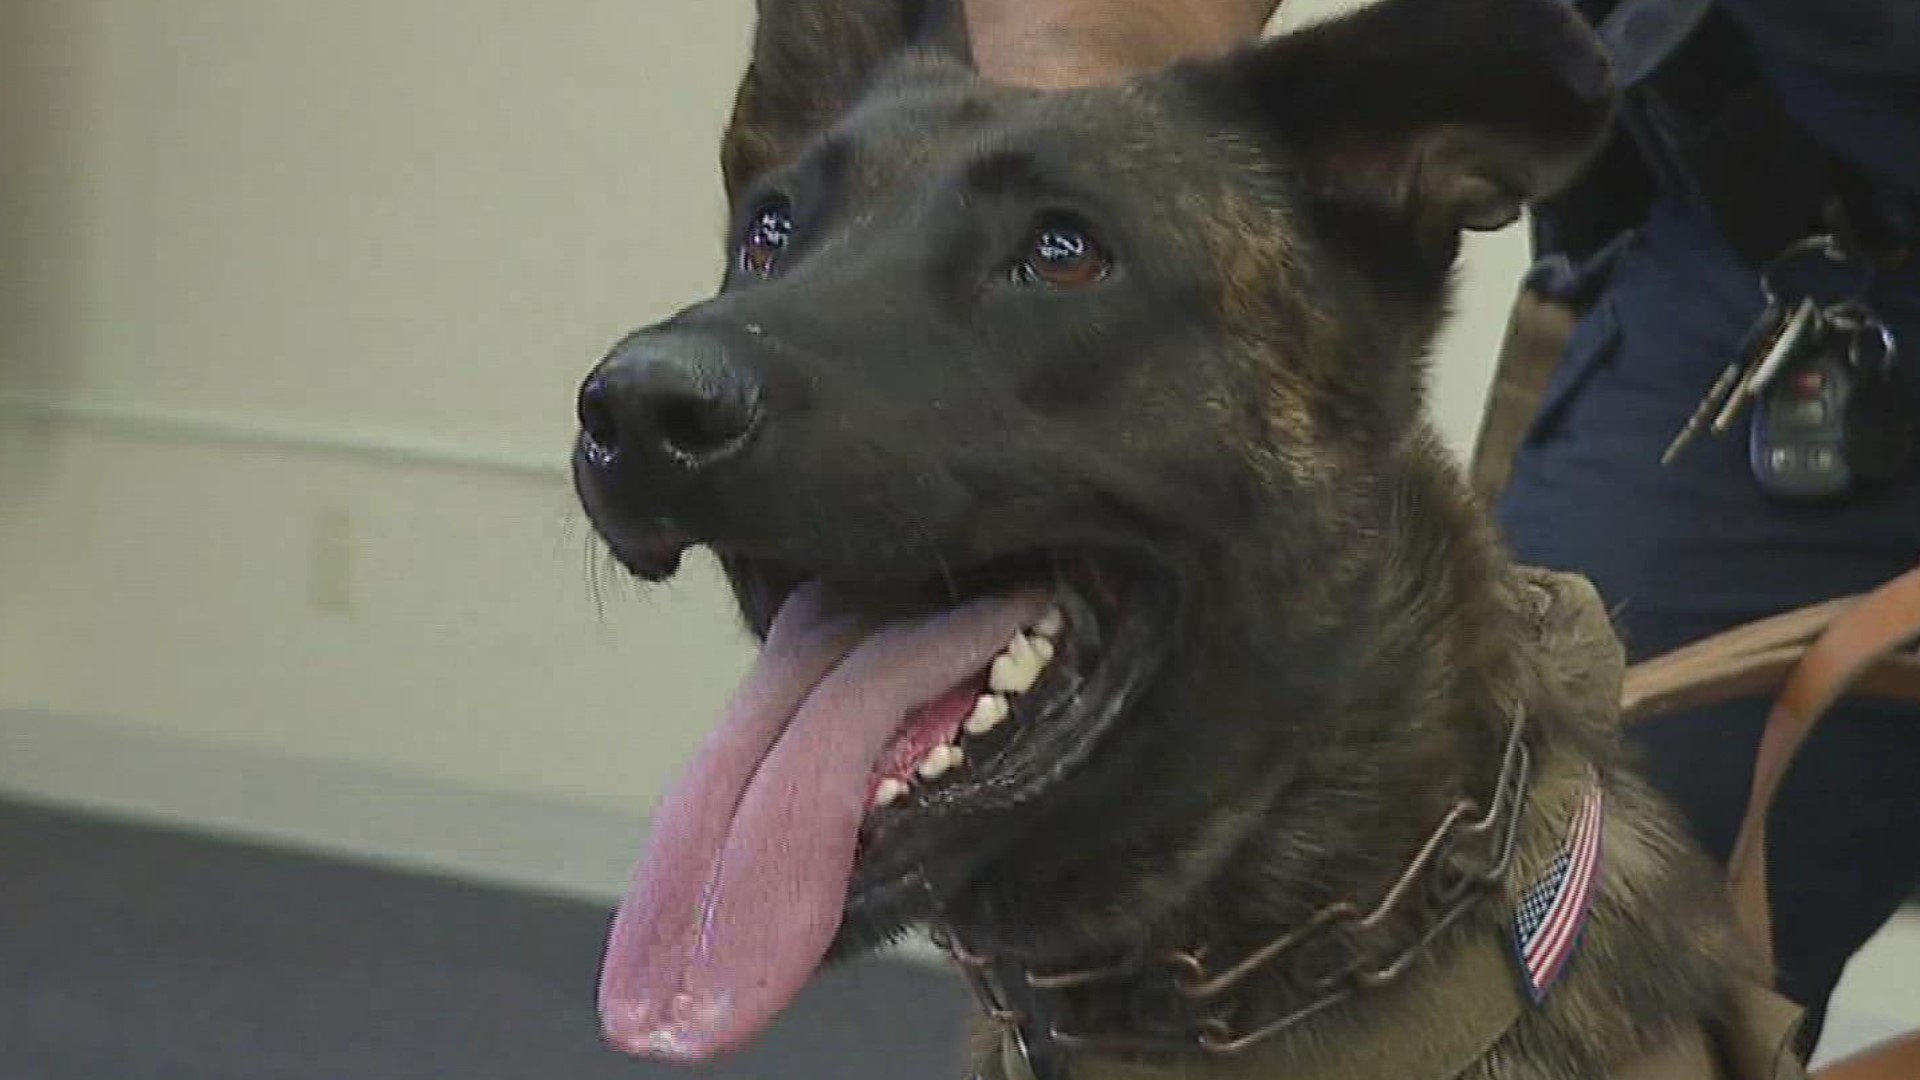 Senior CCPD officer Pedro Muniz is the new K9's handler, and said the new four-legged officer is ready to serve and protect the citizens of Corpus Christi.